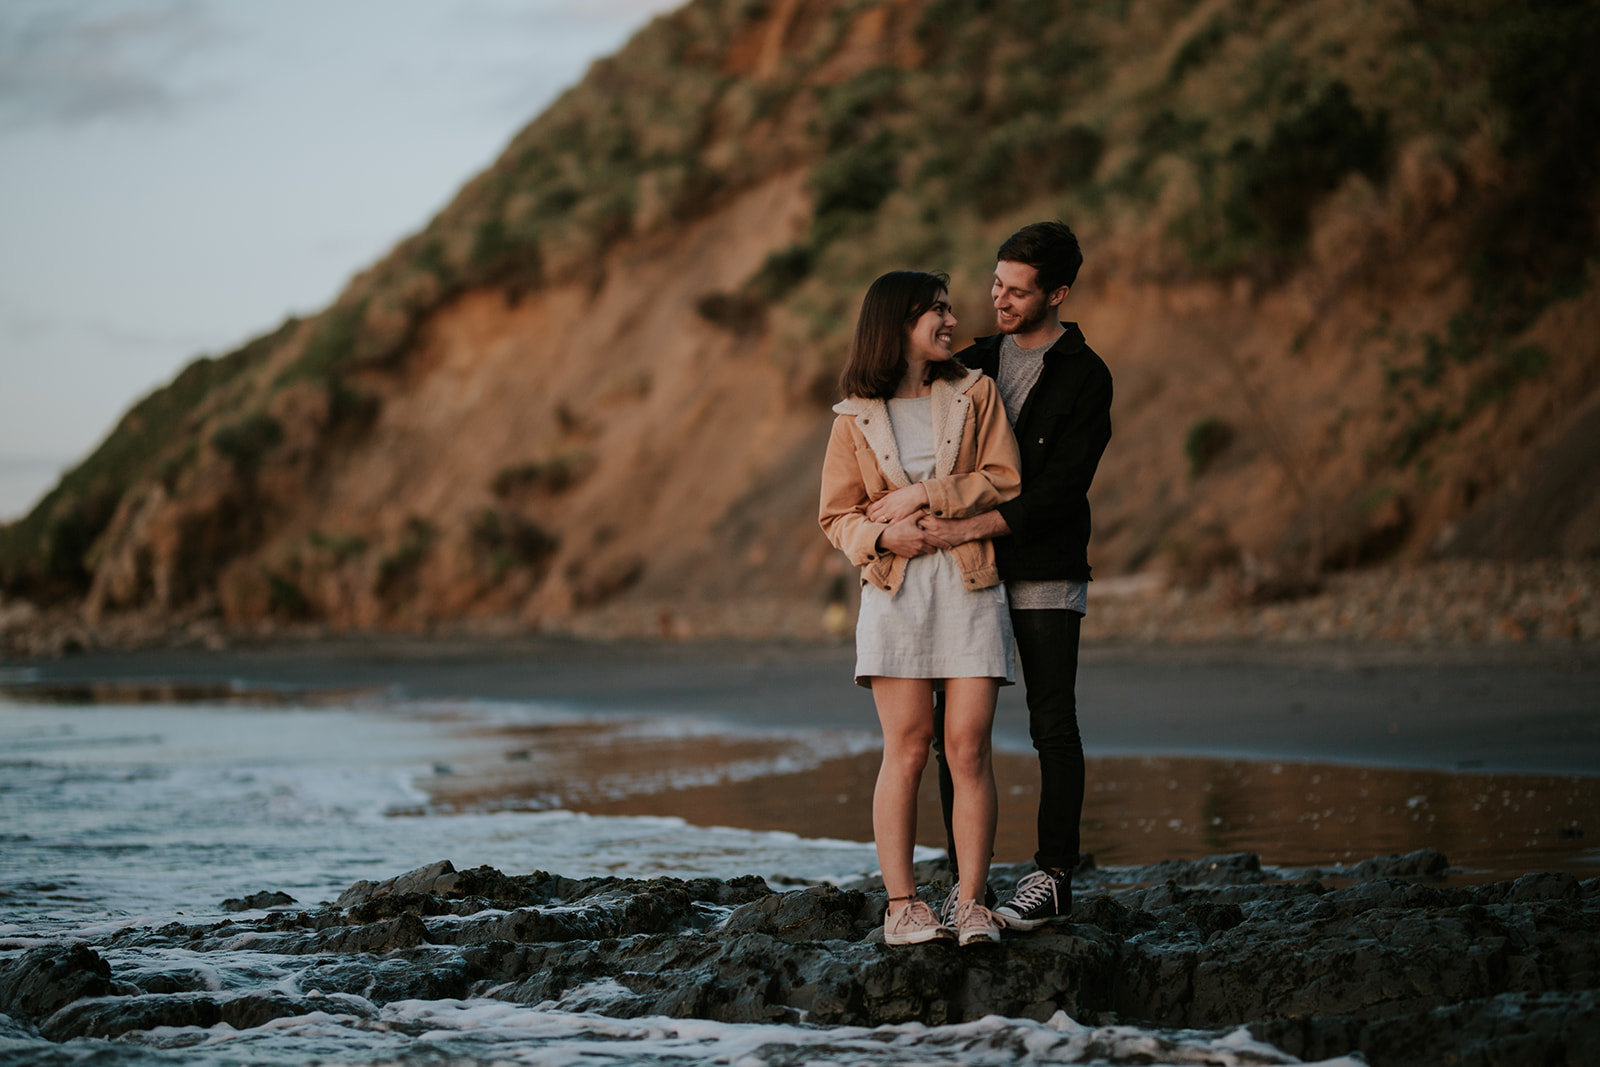 Sunset elopement at Port Waikato. Couple in casual attire standing on a rocks by the ocean.